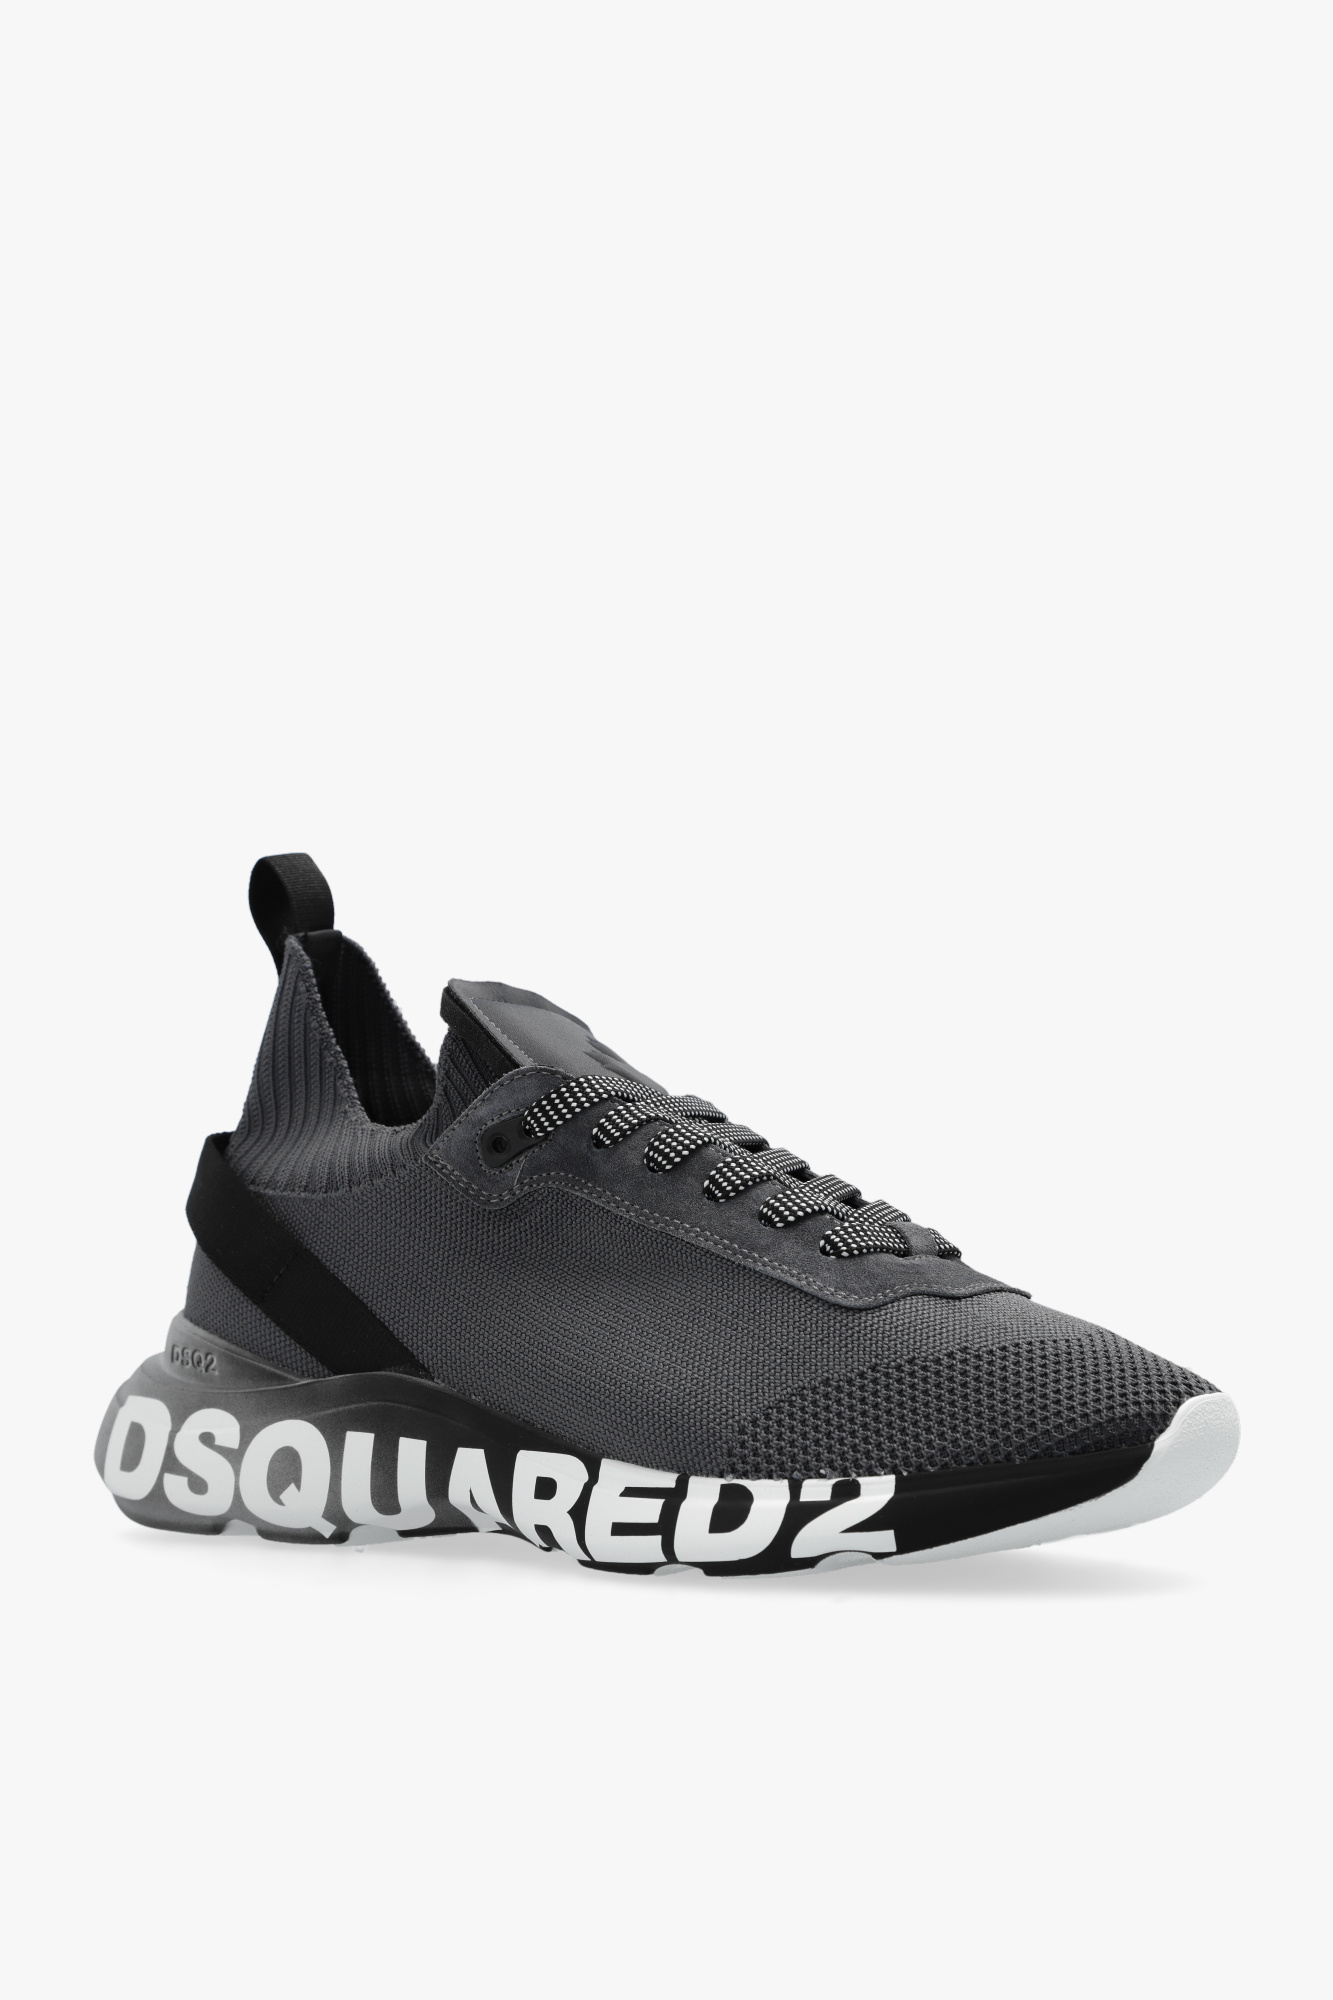 Dsquared2 ‘Fly’ sneakers | Men's Shoes | Vitkac